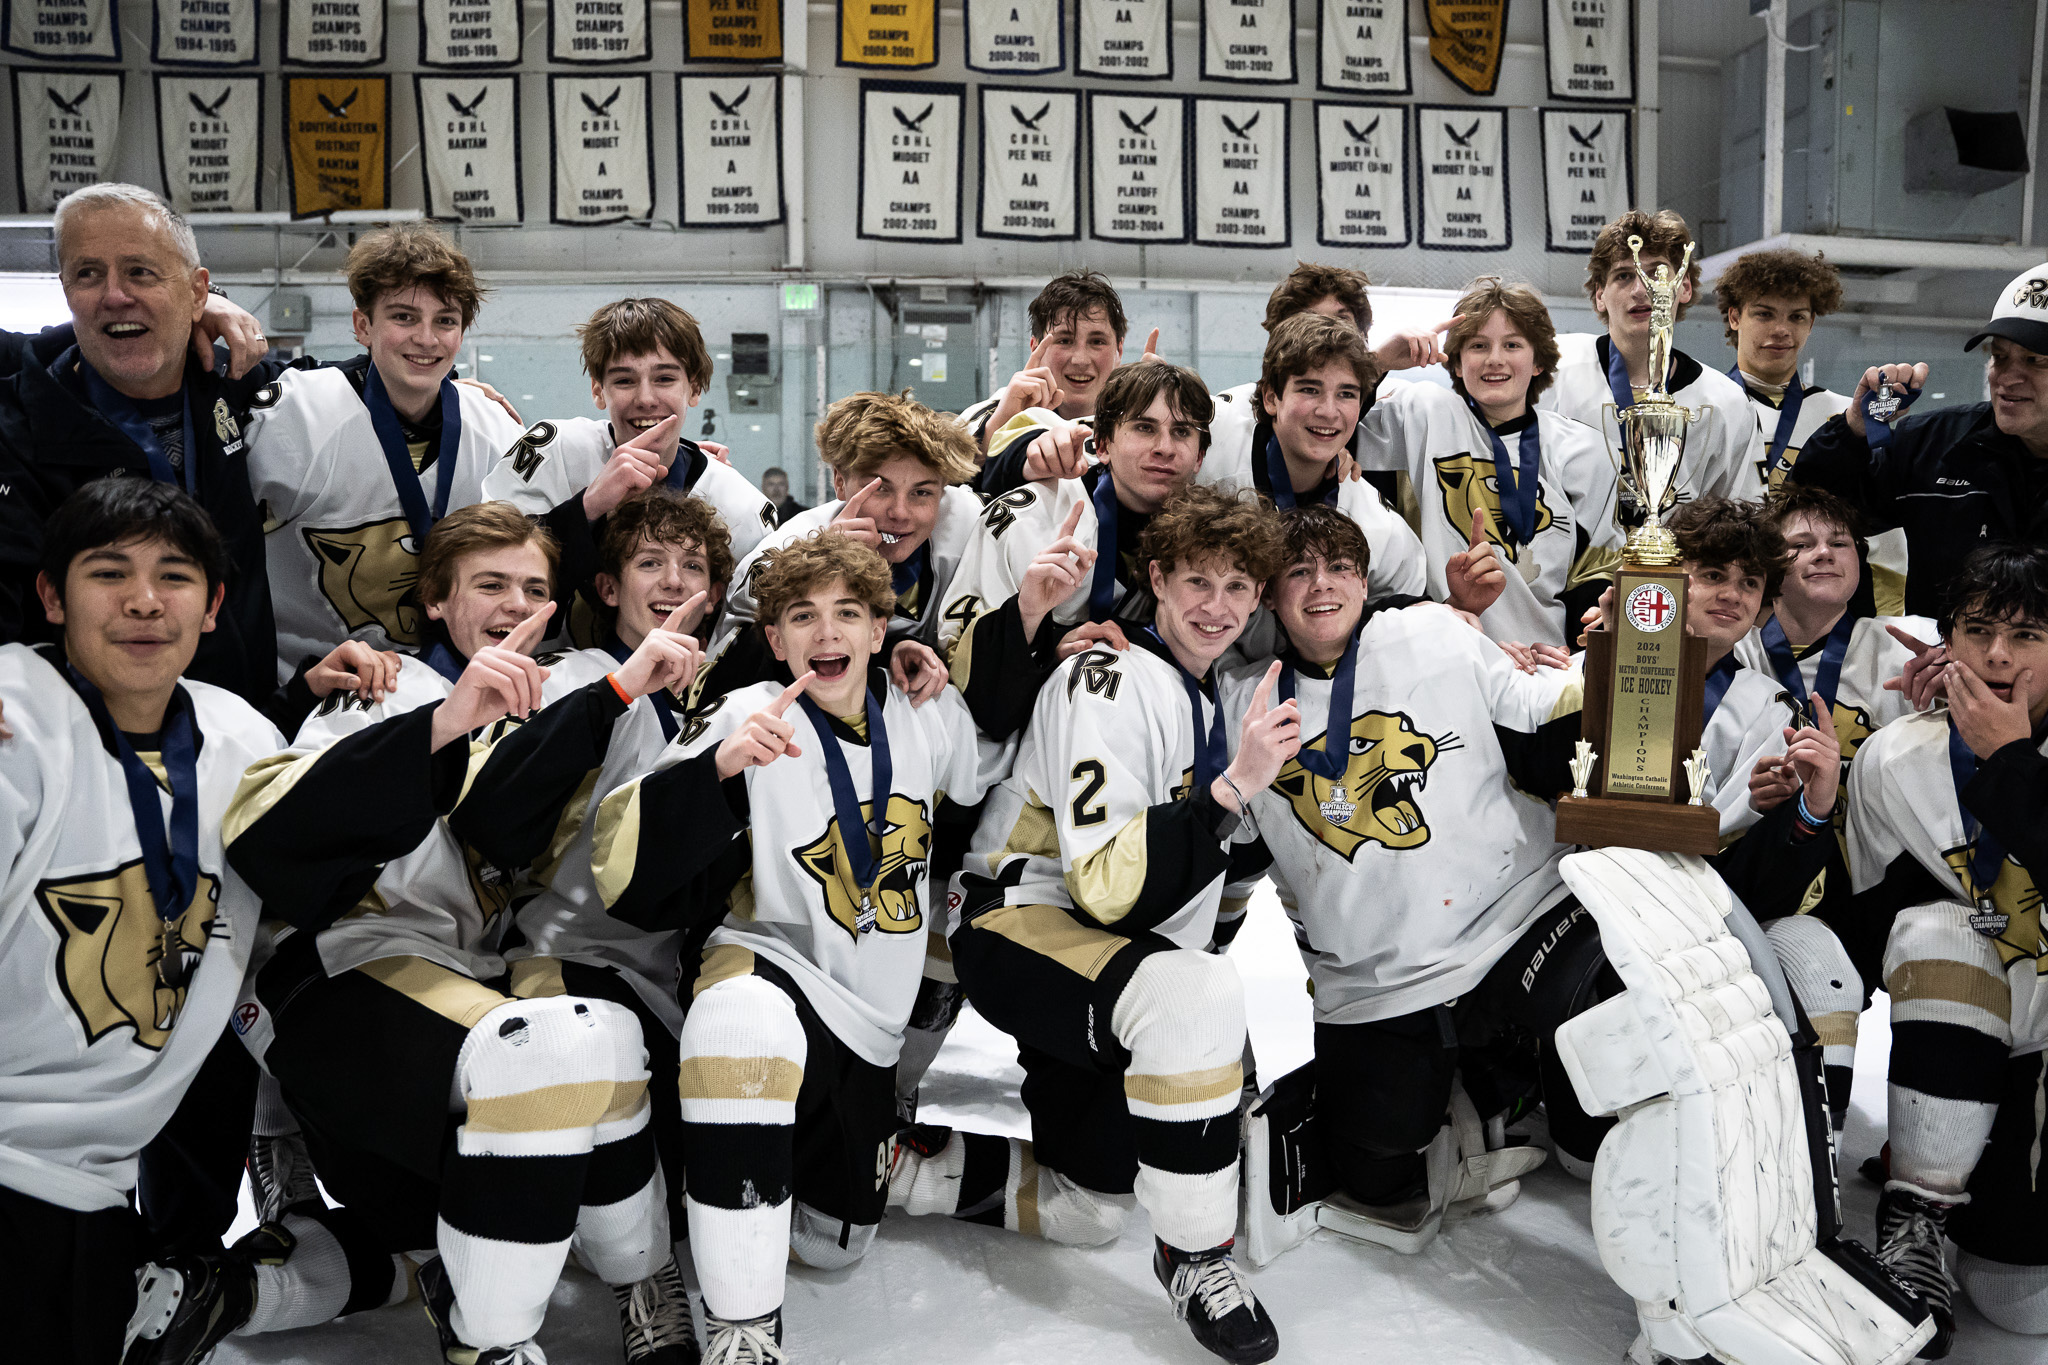 Paul VI Tops Good Counsel 4-2 to Capture Back to Back Ice Hockey Metro Championships